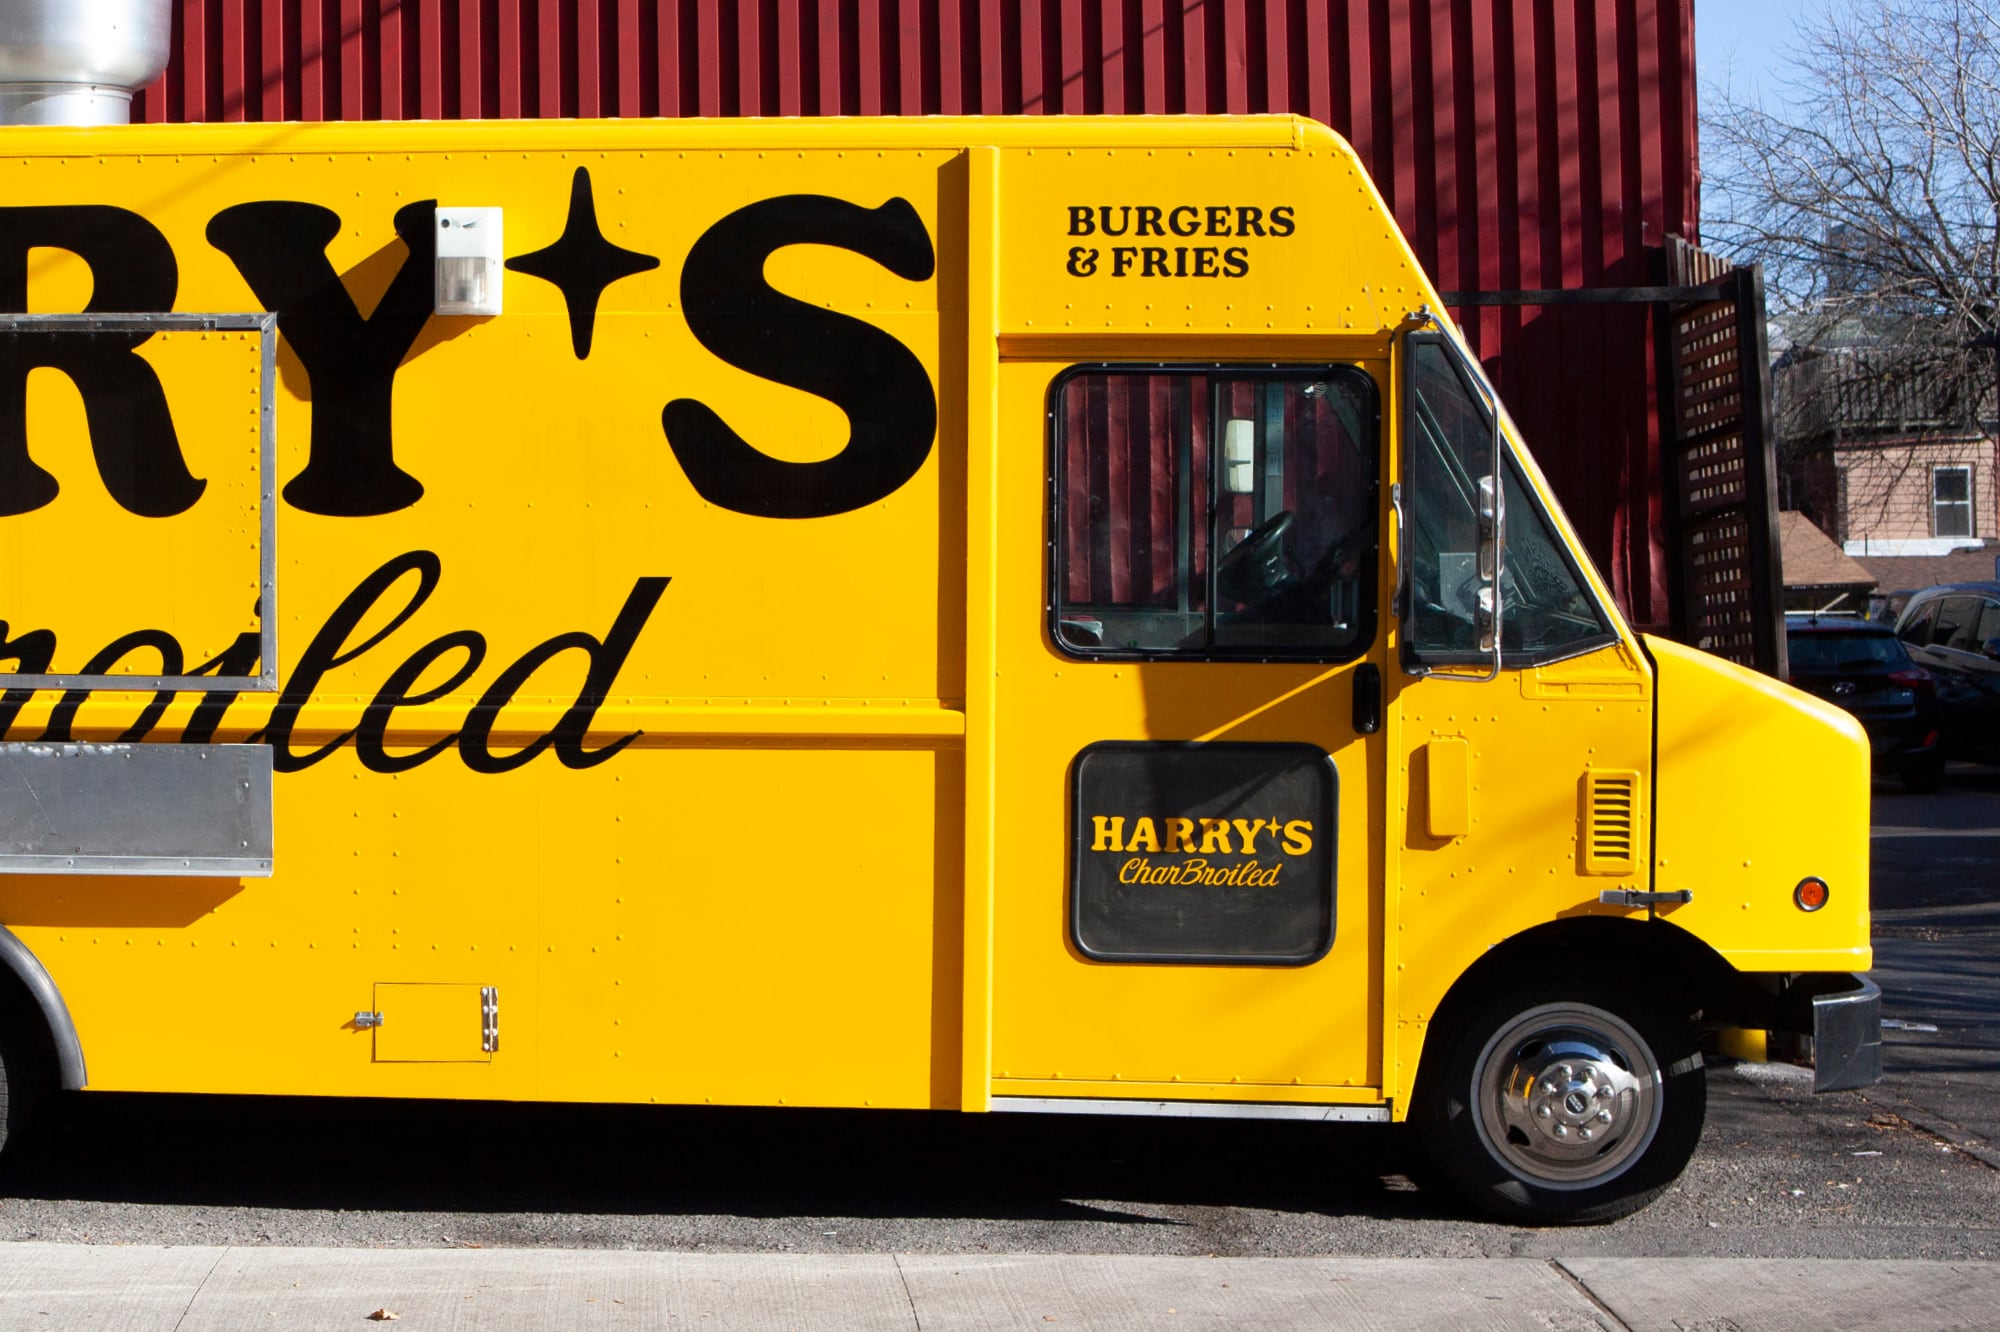 Detail of the Harry’s Charbroiled food truck